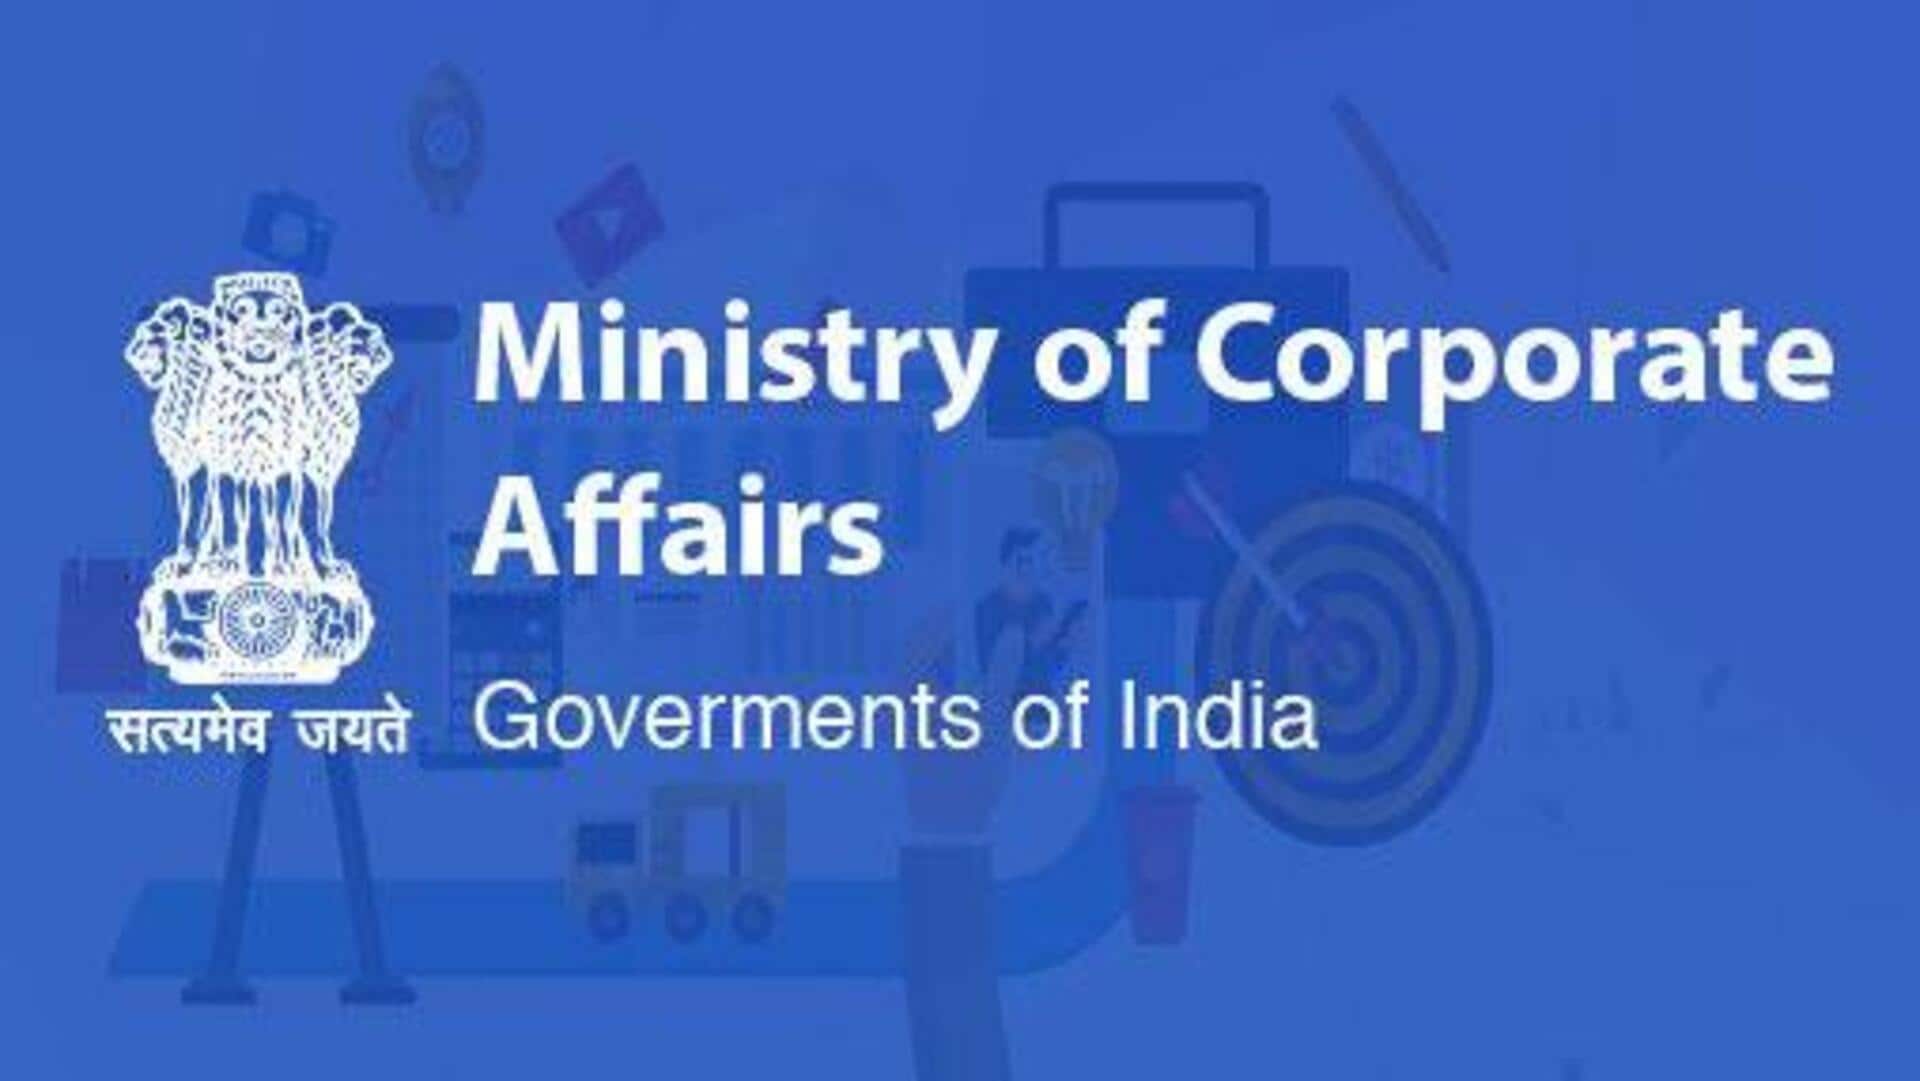 Over 15,300 companies registered in August, says Centre